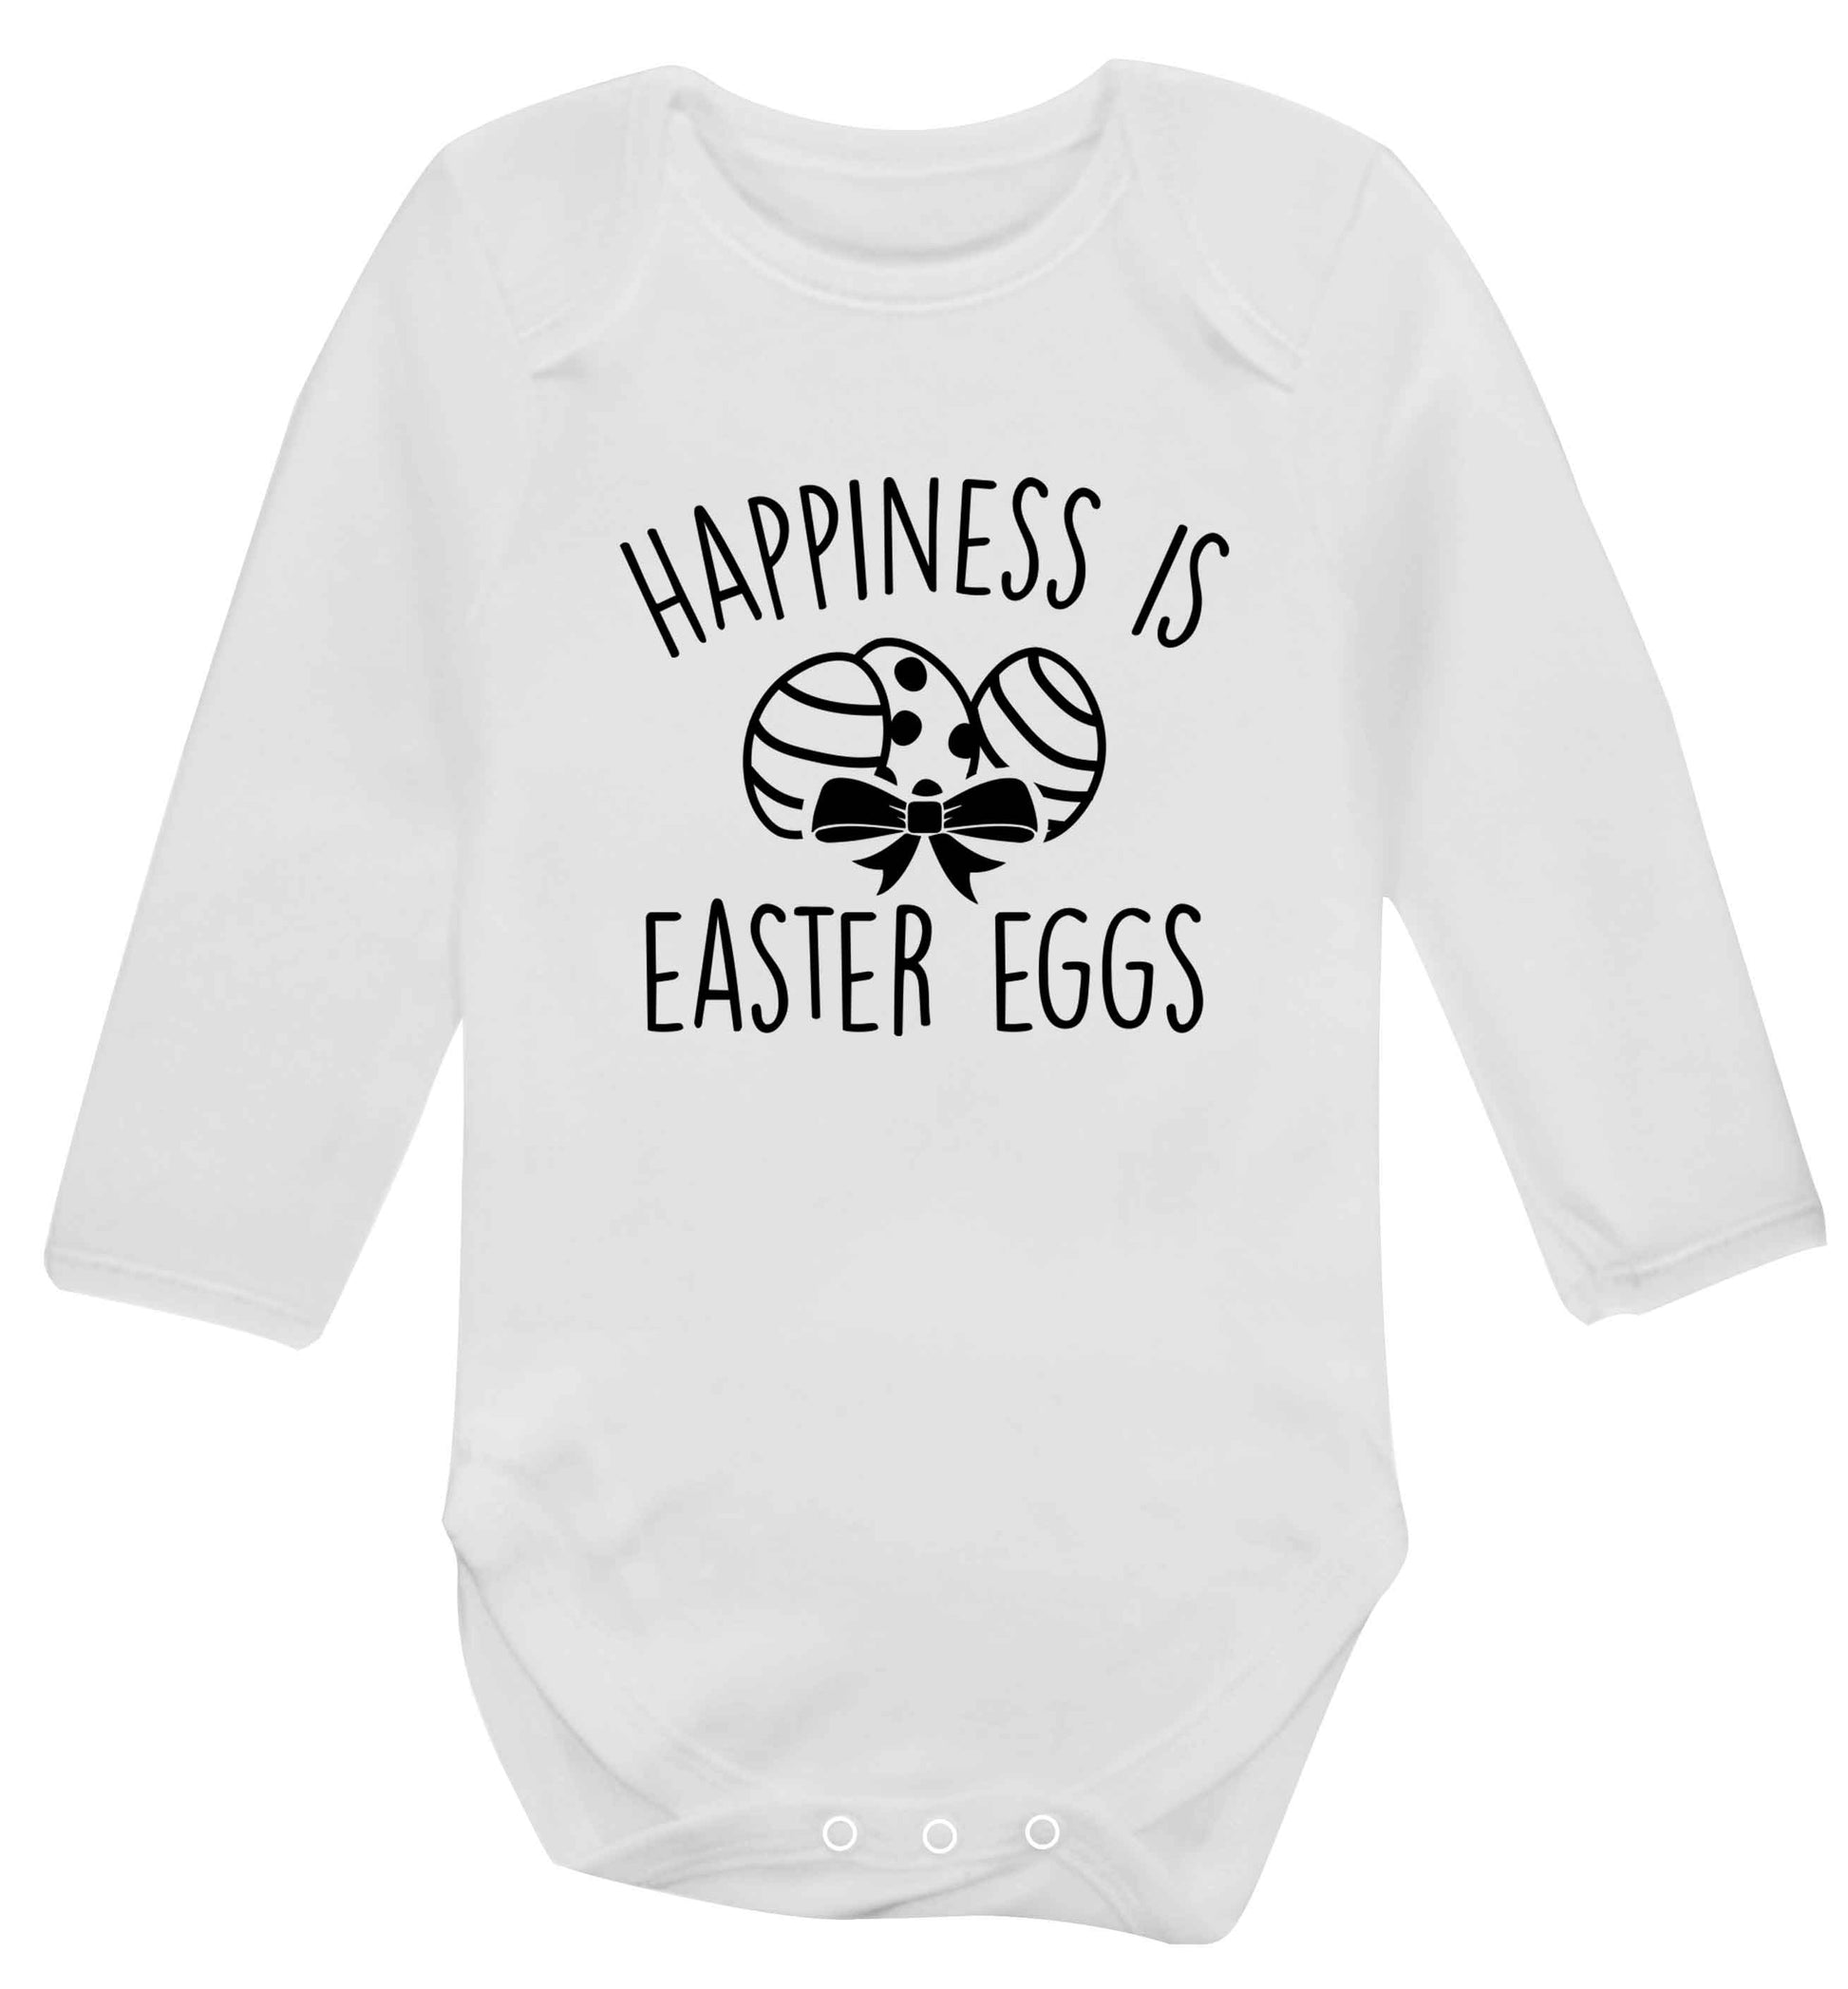 Happiness is Easter eggs baby vest long sleeved white 6-12 months